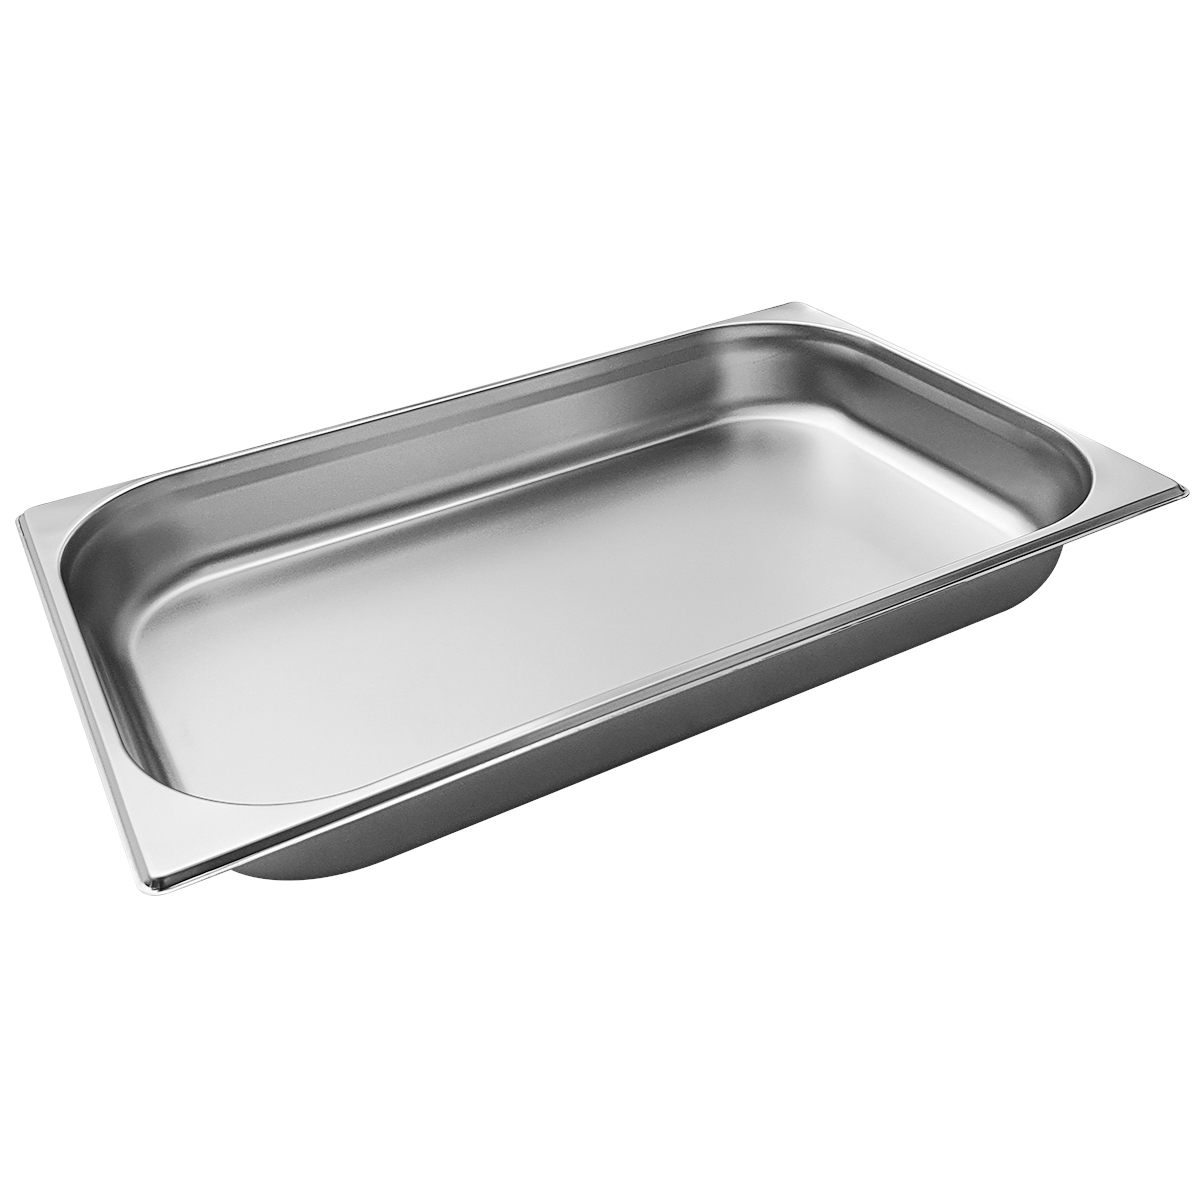 Cater-Cook 1/1 Stainless Steel Gastronorm Container 65mm Deep - CK4004